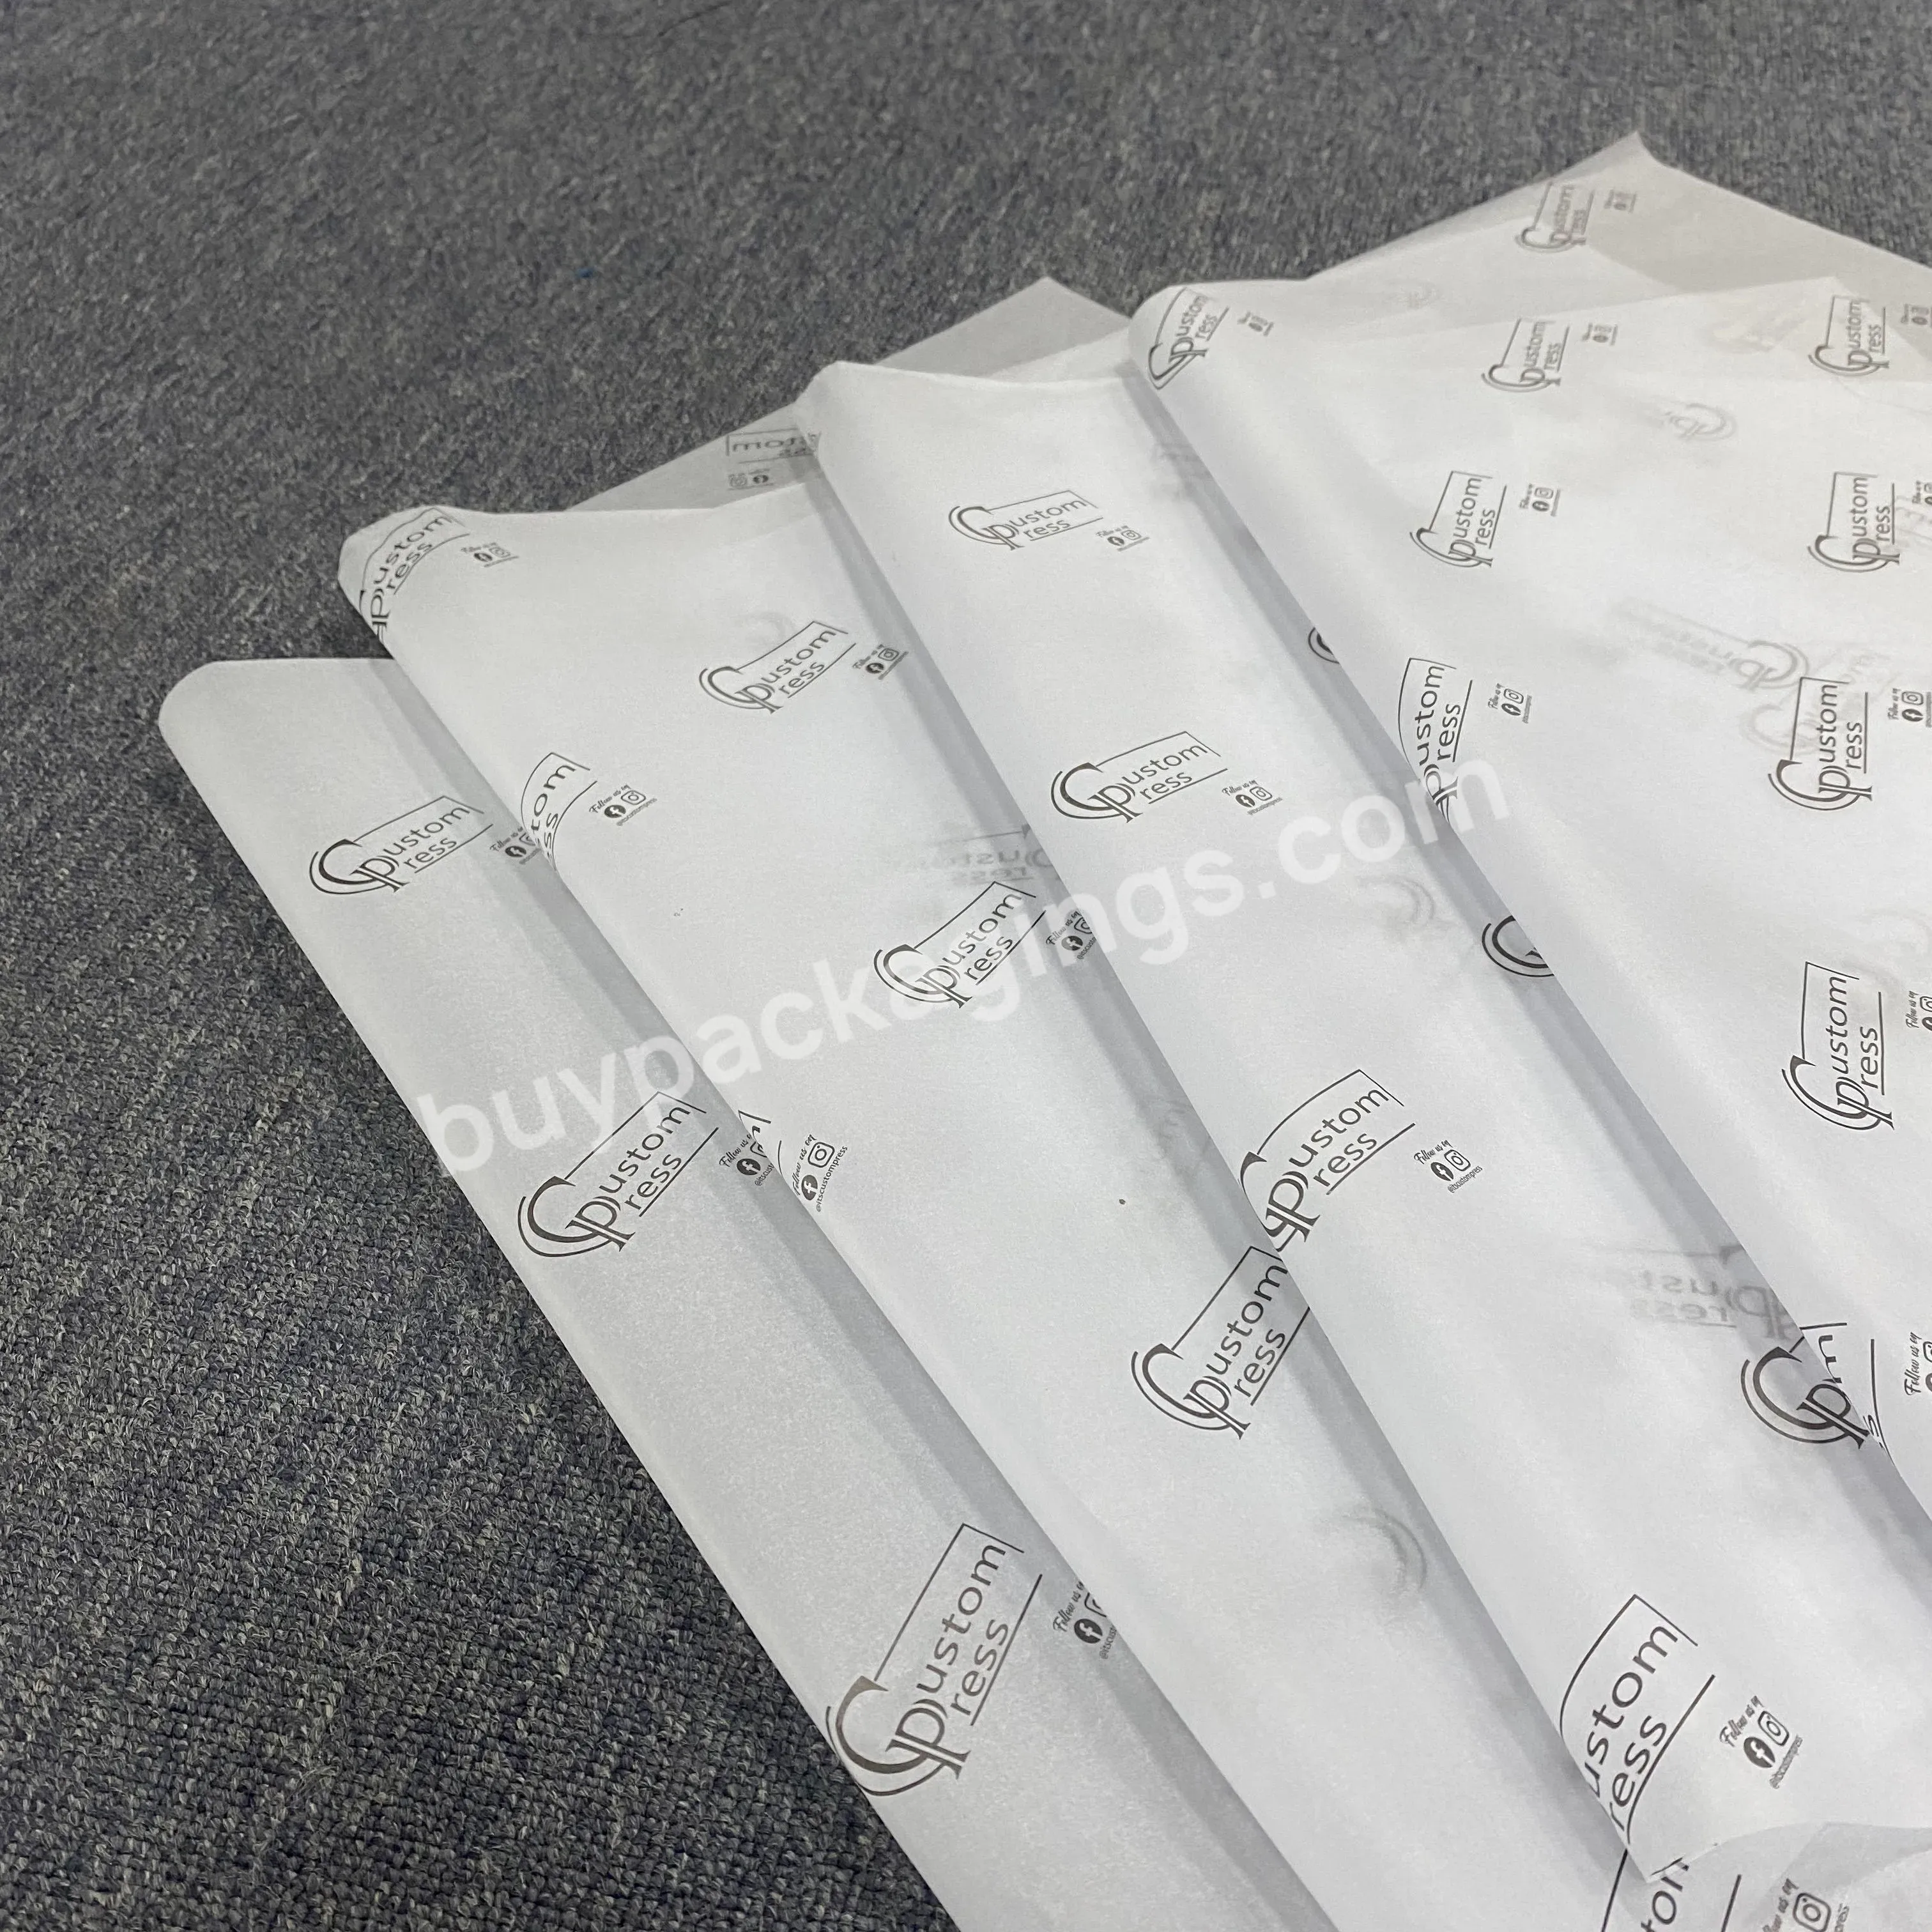 Fashionable Design Recyclable 17g Wrapping Tissue Paper Customize Size Logo Print Colorful Print Flower Tissue With Brand - Buy Luxury Design In 2023 17g 50*70cm Wrapping Tissue Paper,Customize Any Size Logo Print,Recyclable Flower Tissue Foods Packaging.